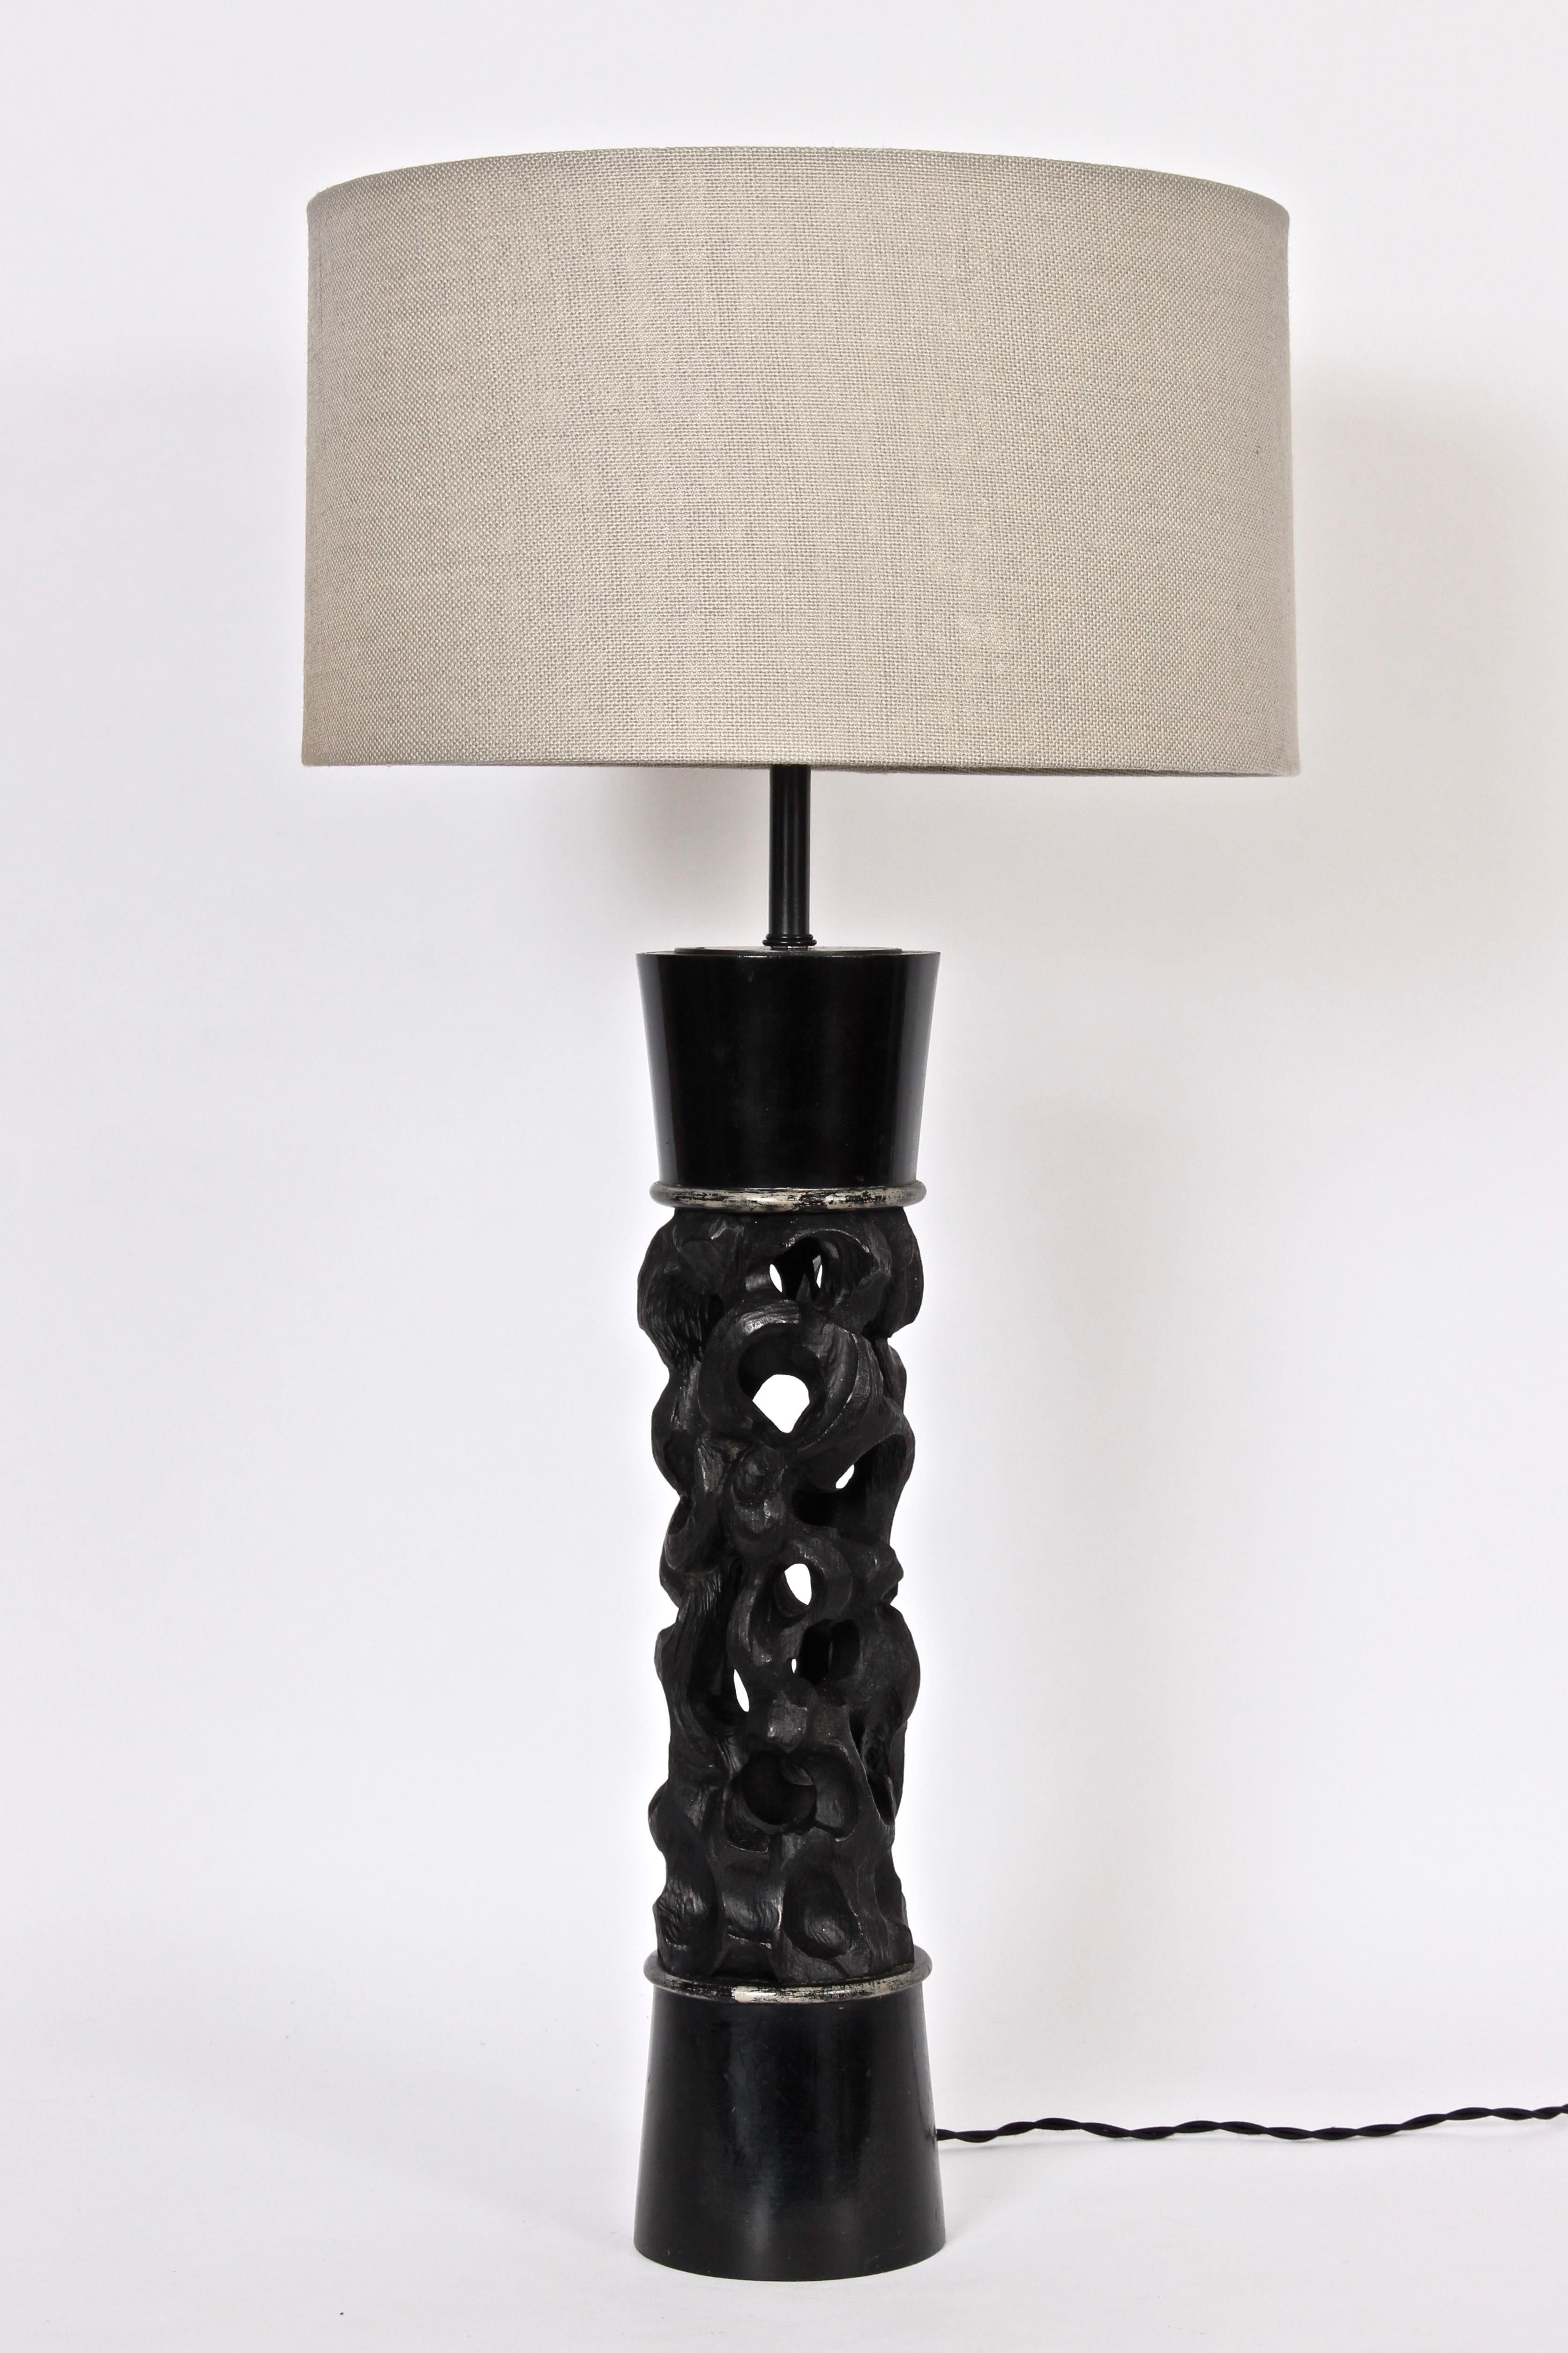 American Substantial James Mont Carved Ebonized Wood Table Lamp, C. 1950 For Sale